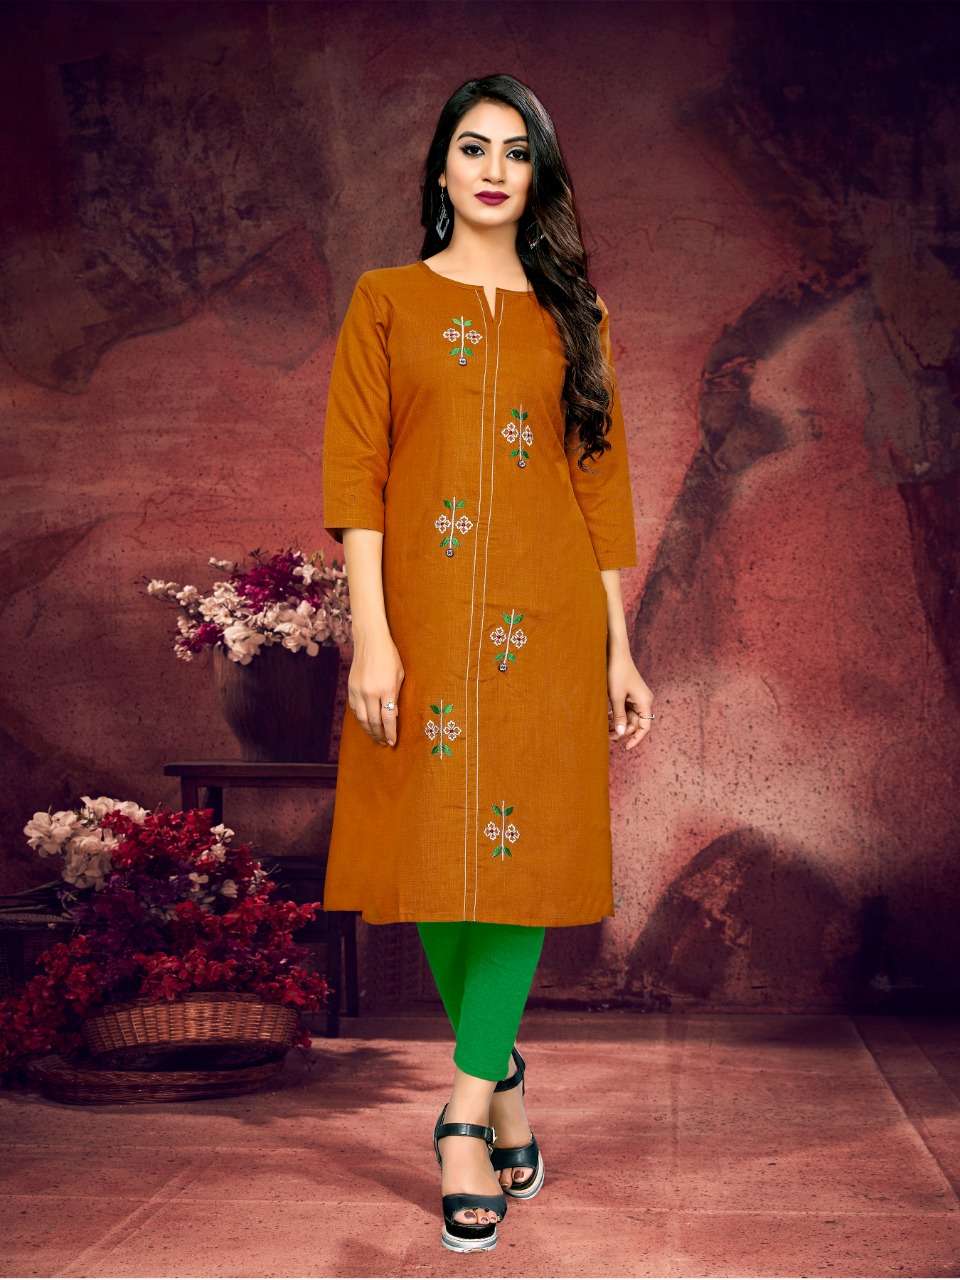 ZUBLEE BY FIESTA 13011 TO 13018 SERIES DESIGNER STYLISH FANCY COLORFUL BEAUTIFUL PARTY WEAR & ETHNIC WEAR COLLECTION SOFT MAGIC SLUB HANDWORK KURTIS AT WHOLESALE PRICE